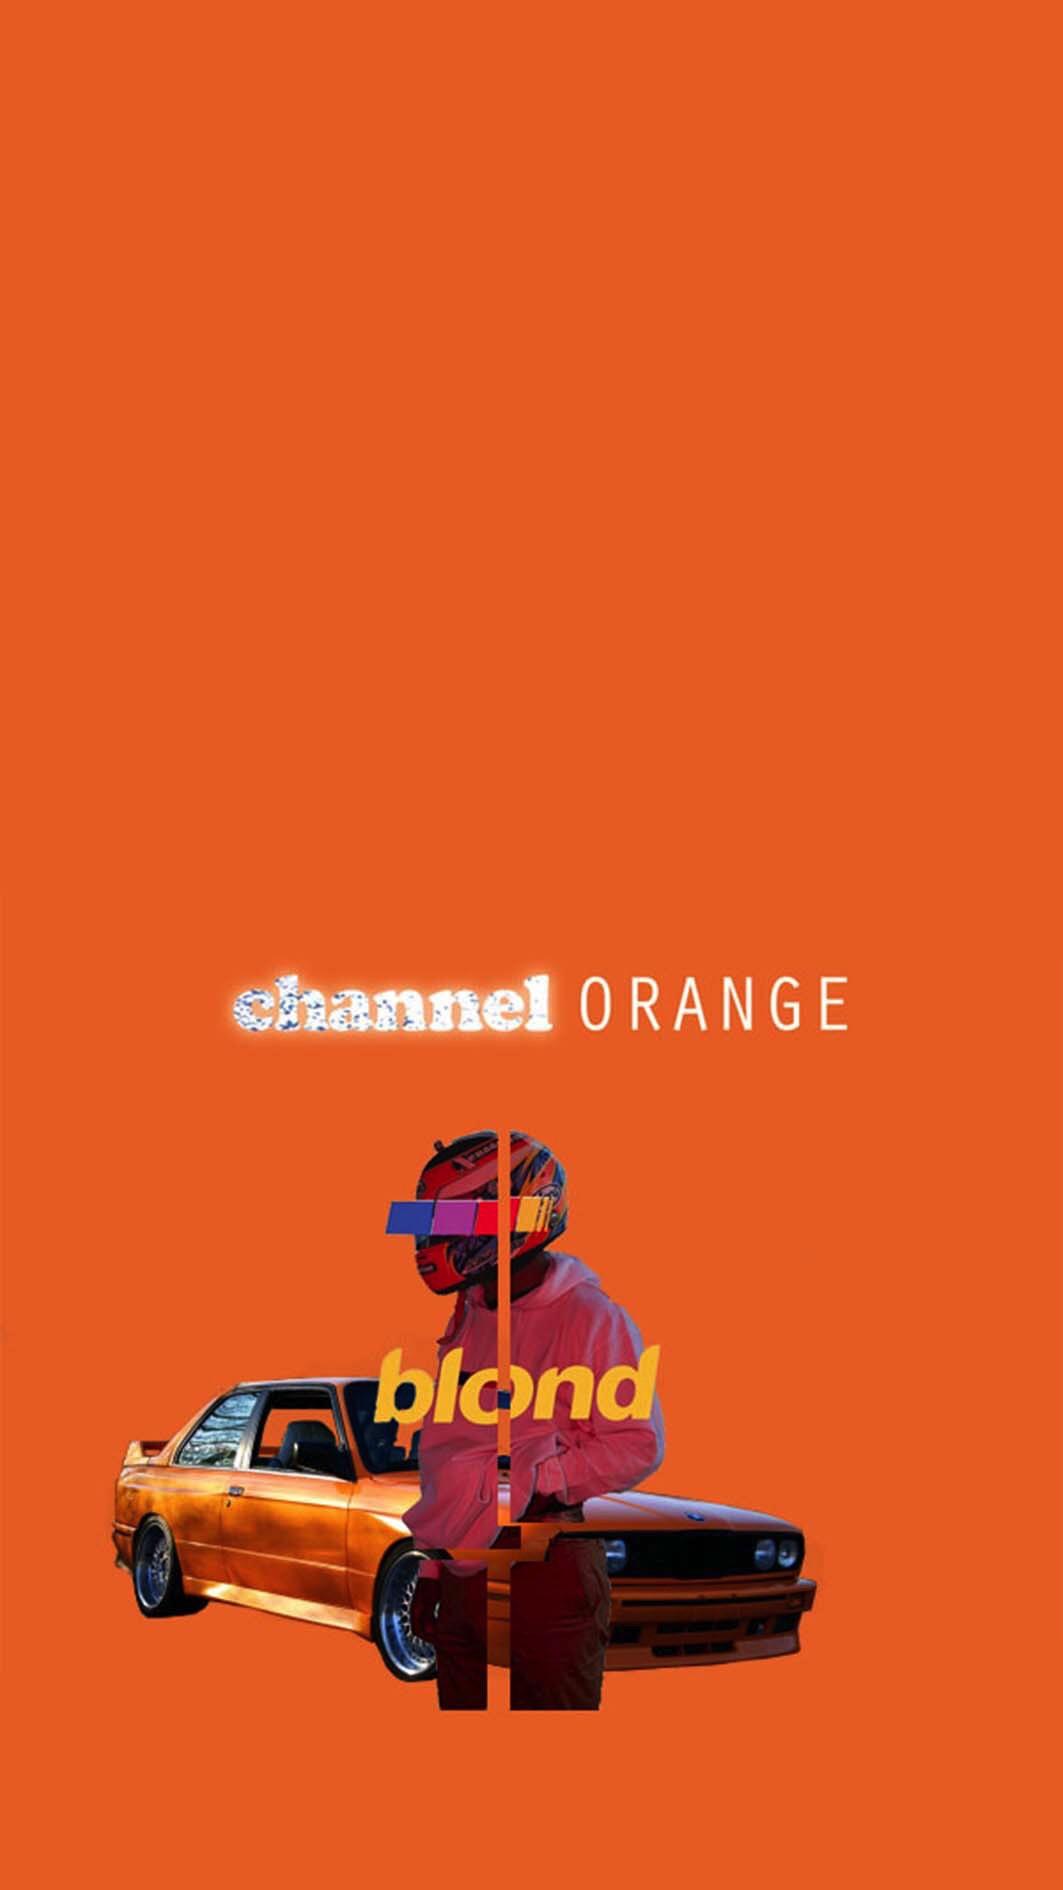 Nostalgia Ultra Channel Orange Blond Wallpaper I Made For IPhone 6. Still New To This So Feedback Would Be Appreciated